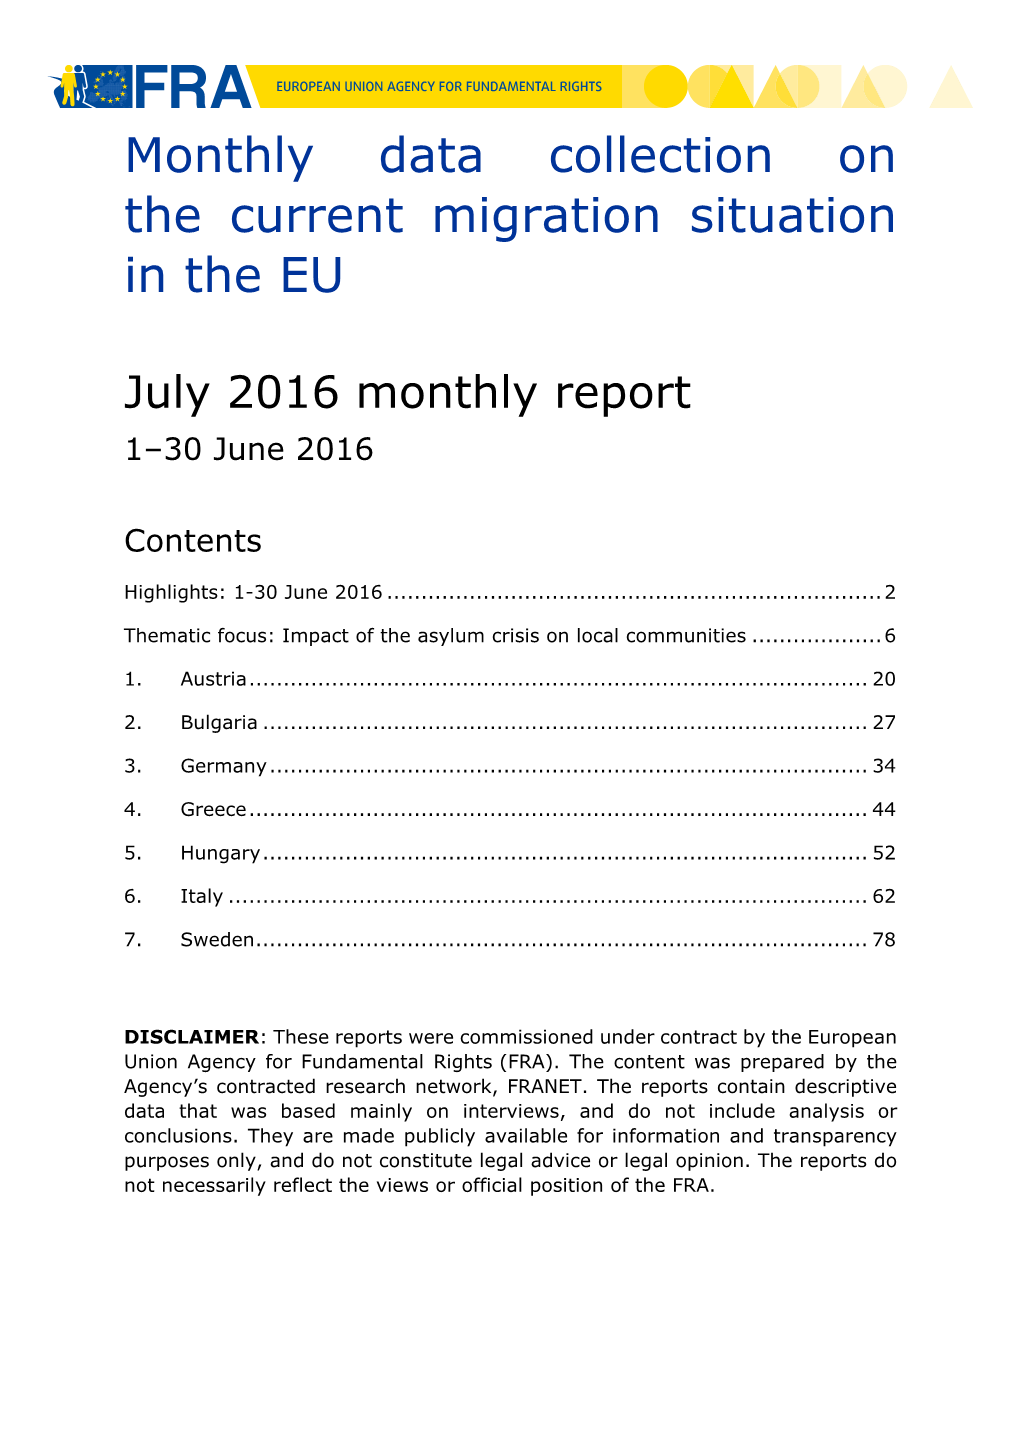 Monthly Data Collection on the Current Migration Situation in the EU